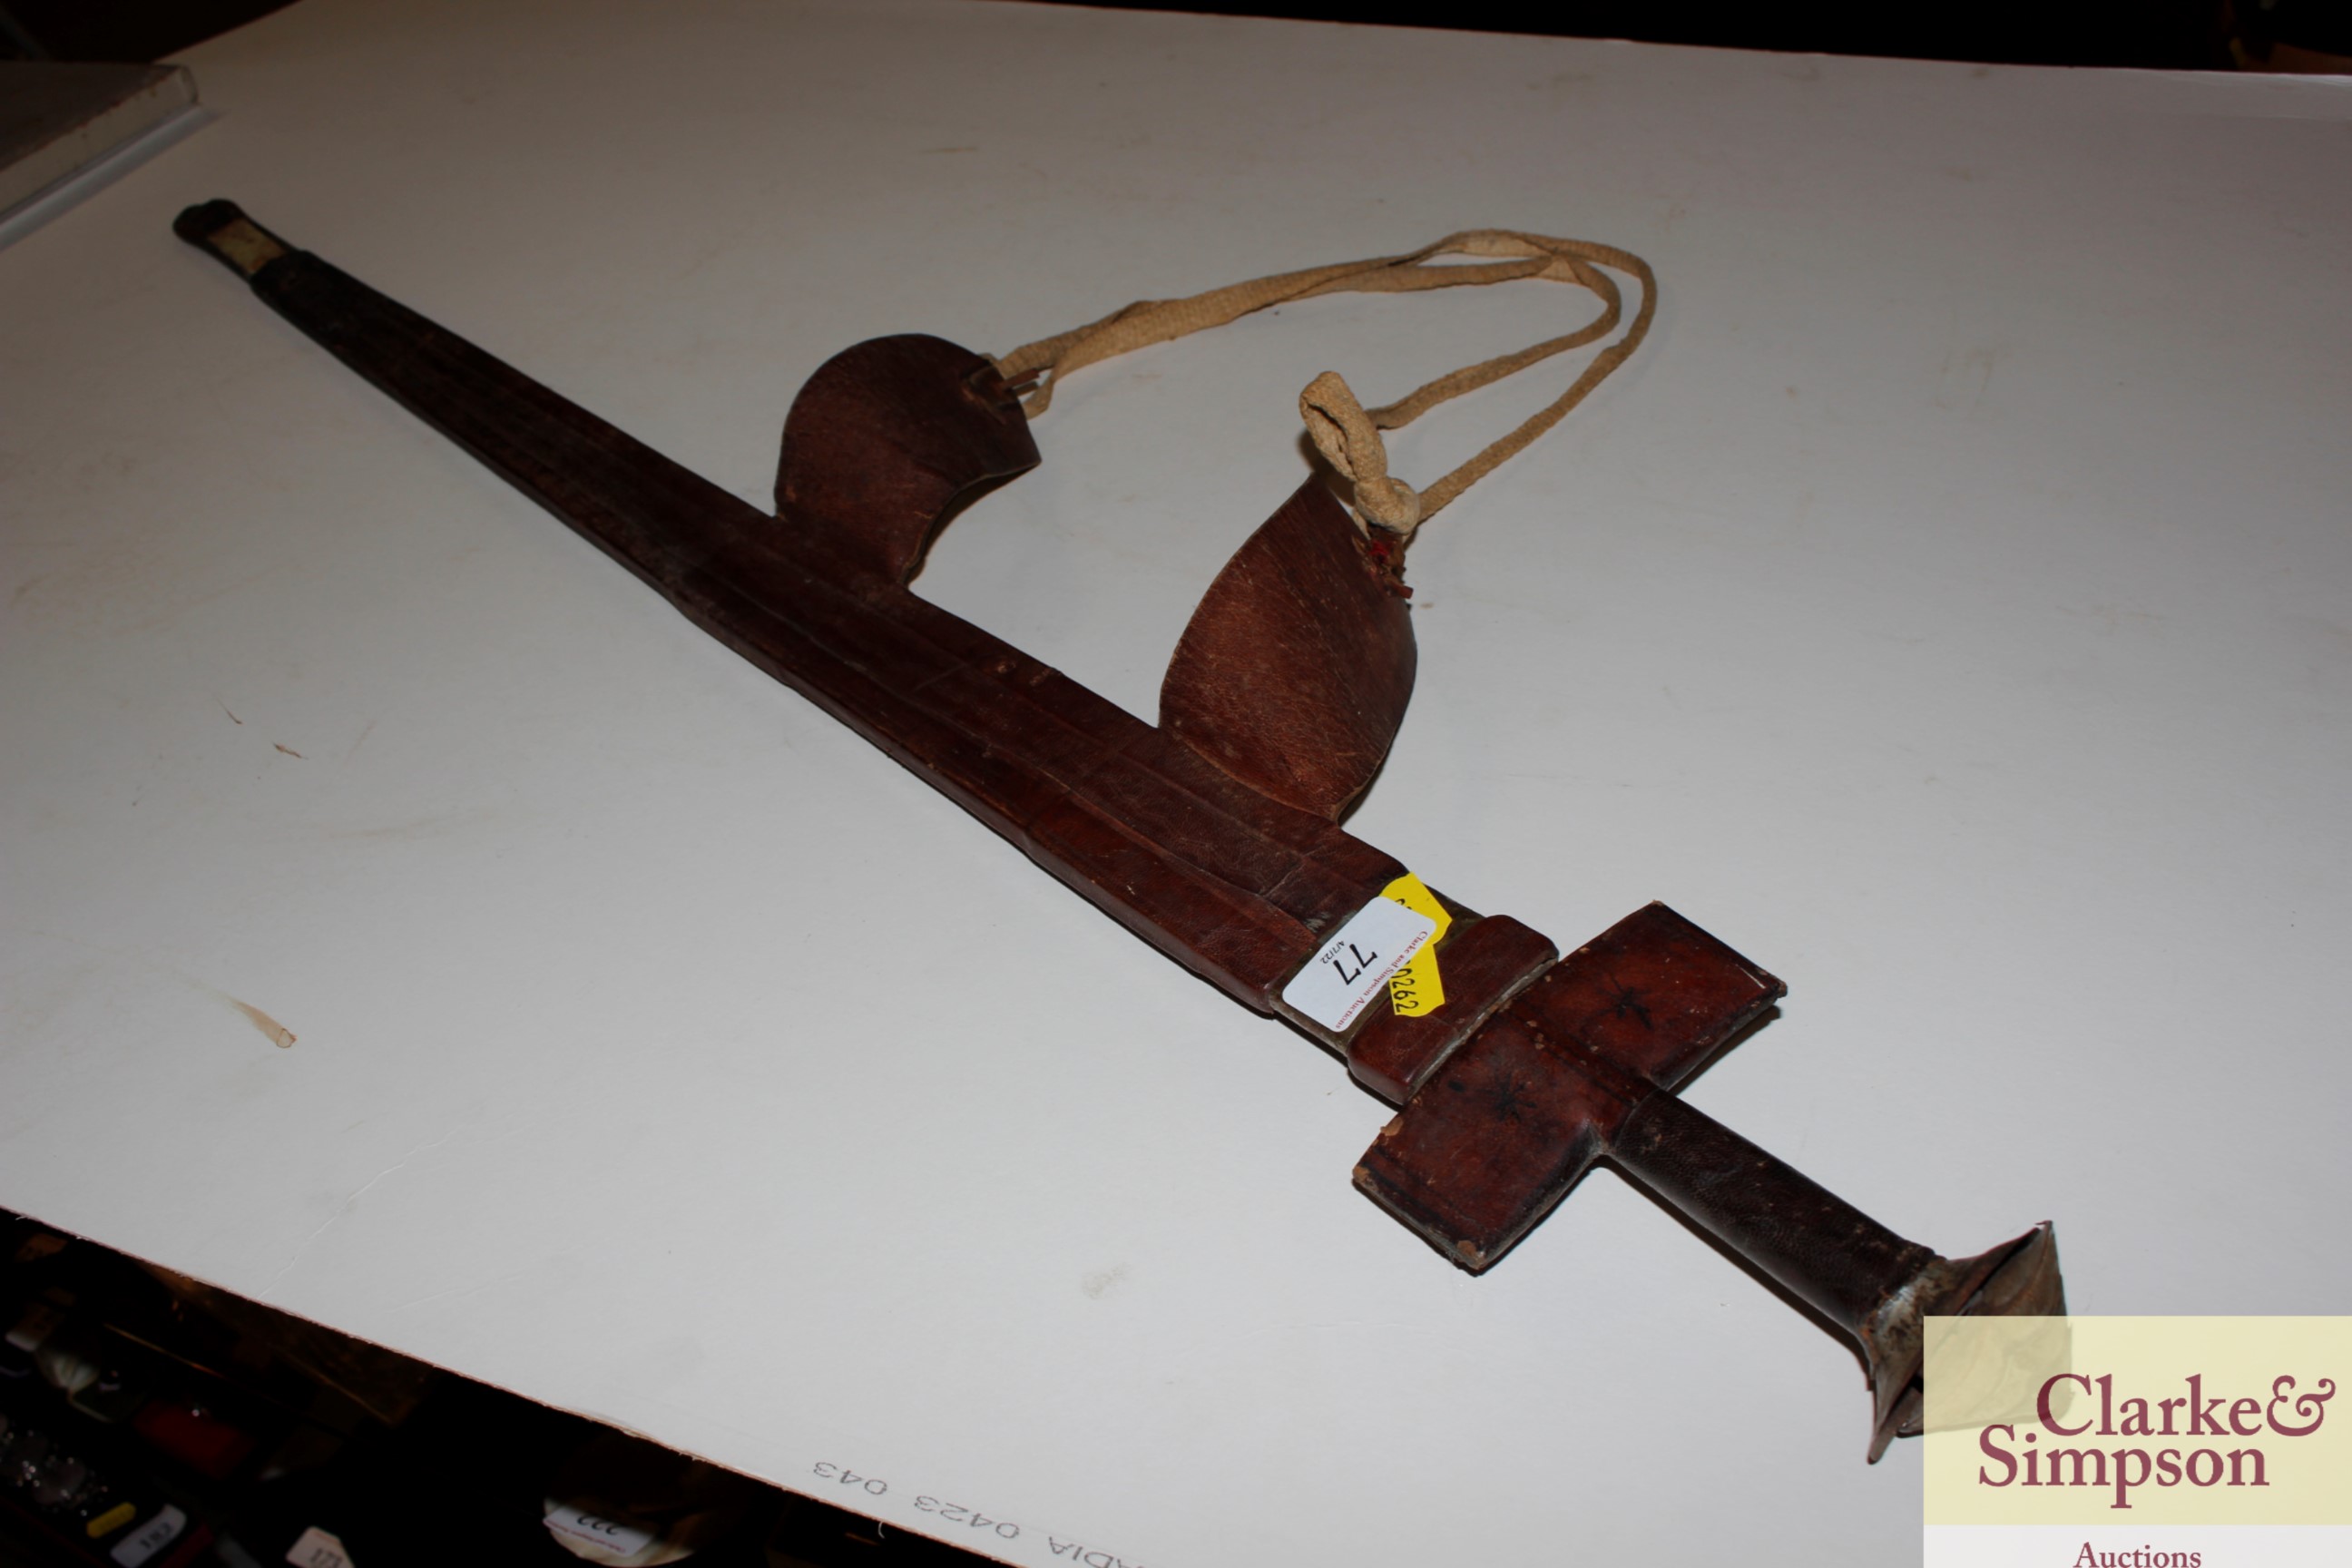 An antique leather covered Kris type sword